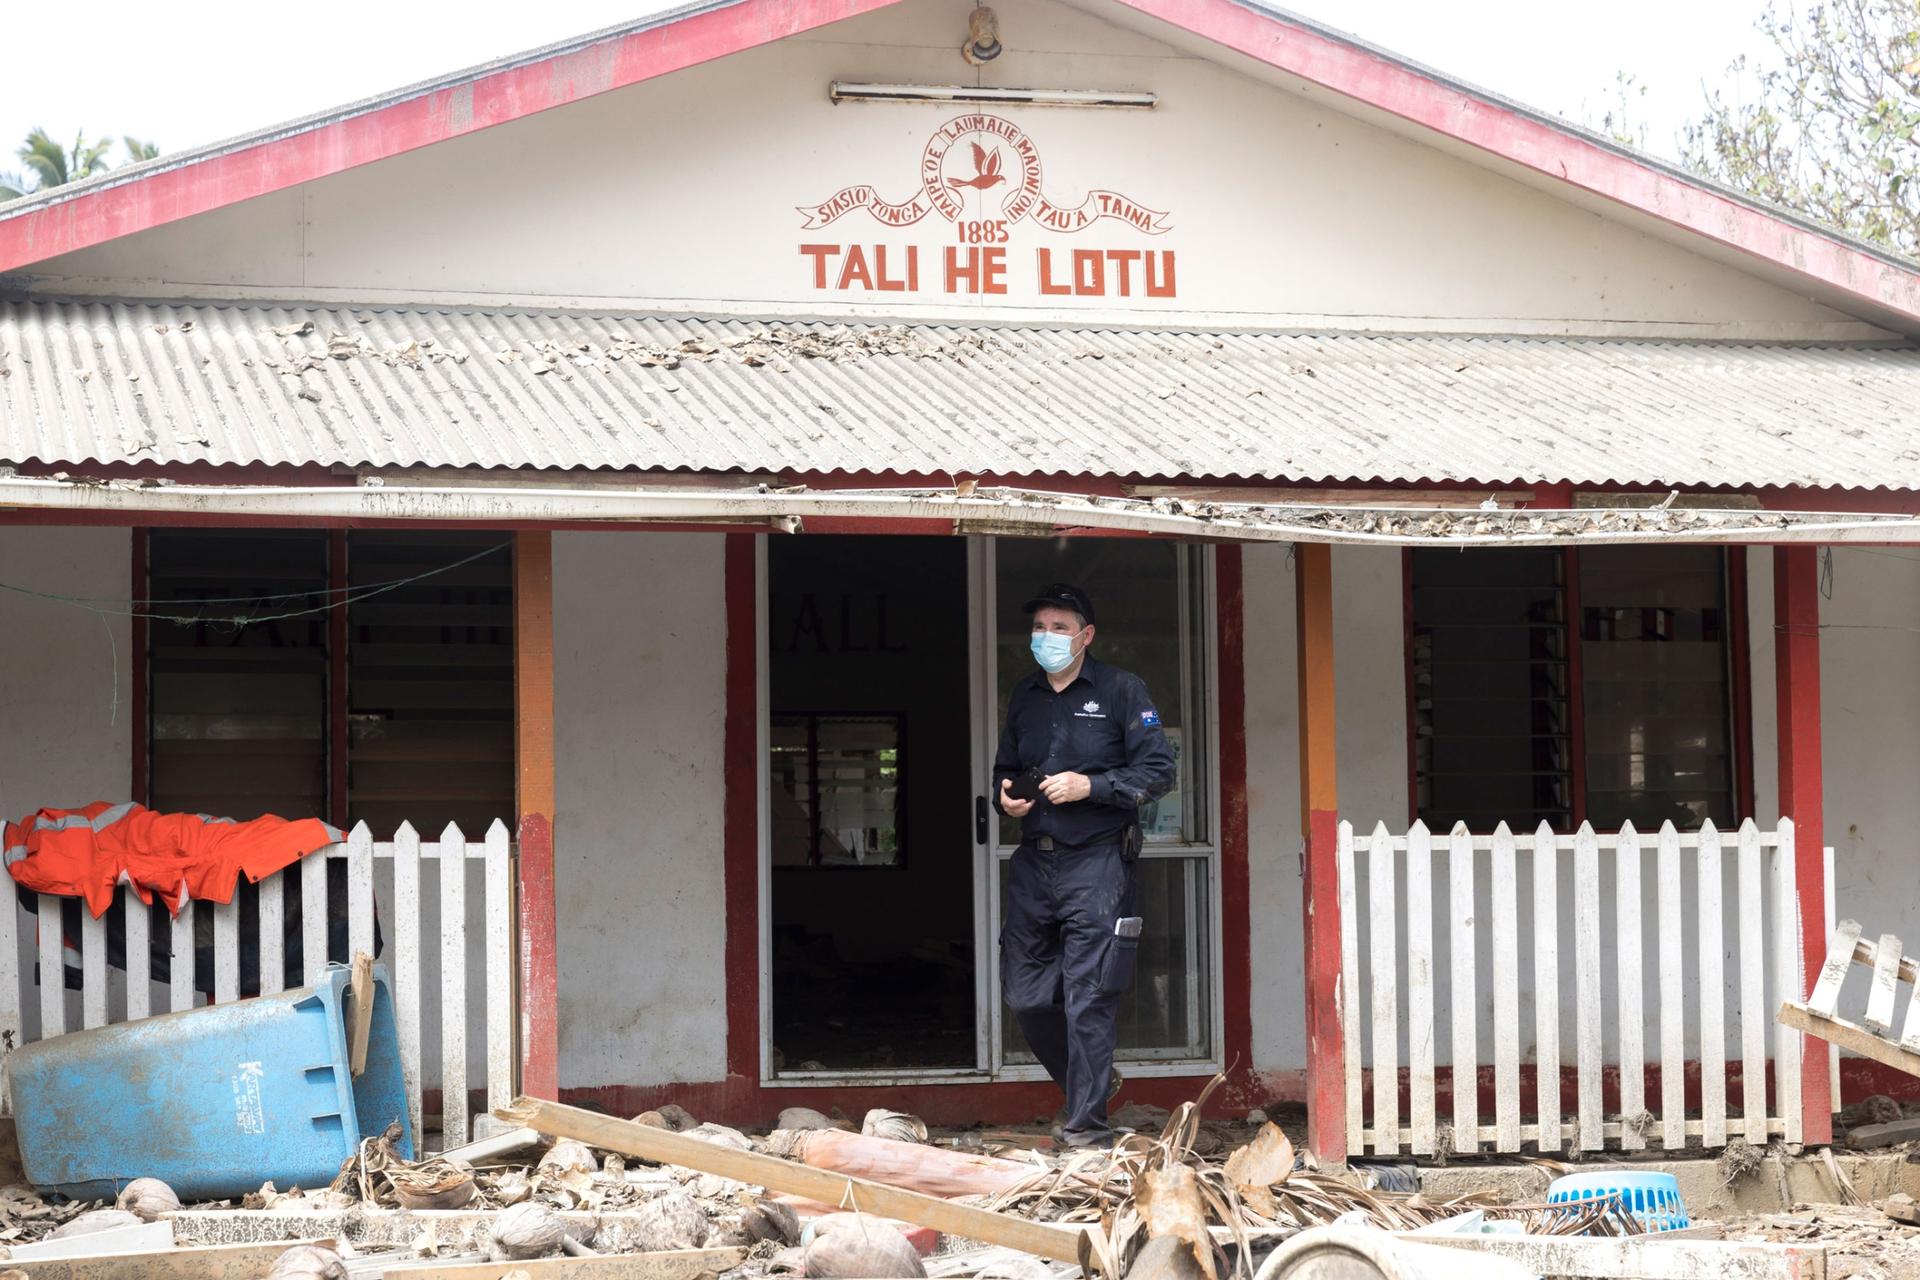 In this photo provided by the Australian Defense Force, an officer of Department of Foreign Affairs & Trade Crisis response team assesses damage to Atata island, in Nuku'alofa, Tonga, following the eruption of underwater volcano, on Feb. 4, 2022.